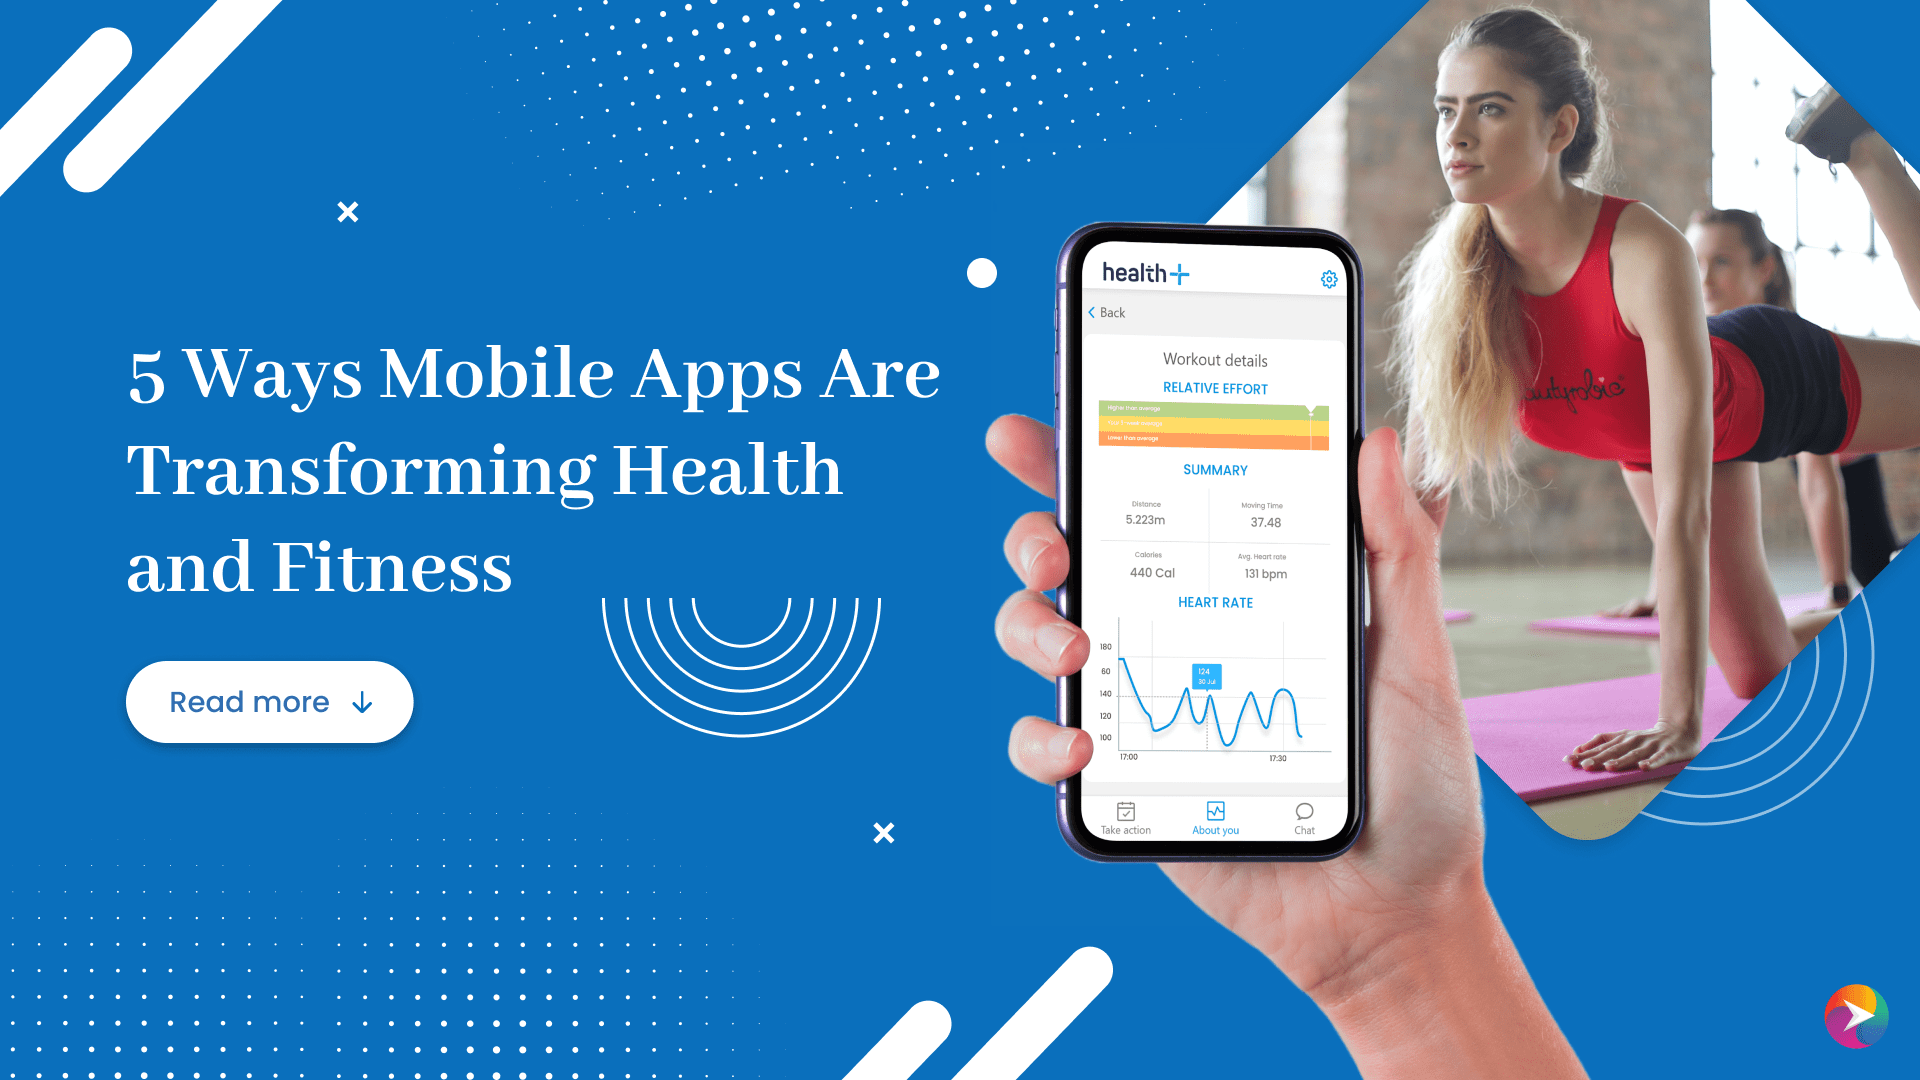 5 Ways Mobile Apps Are Transforming Health and Fitness